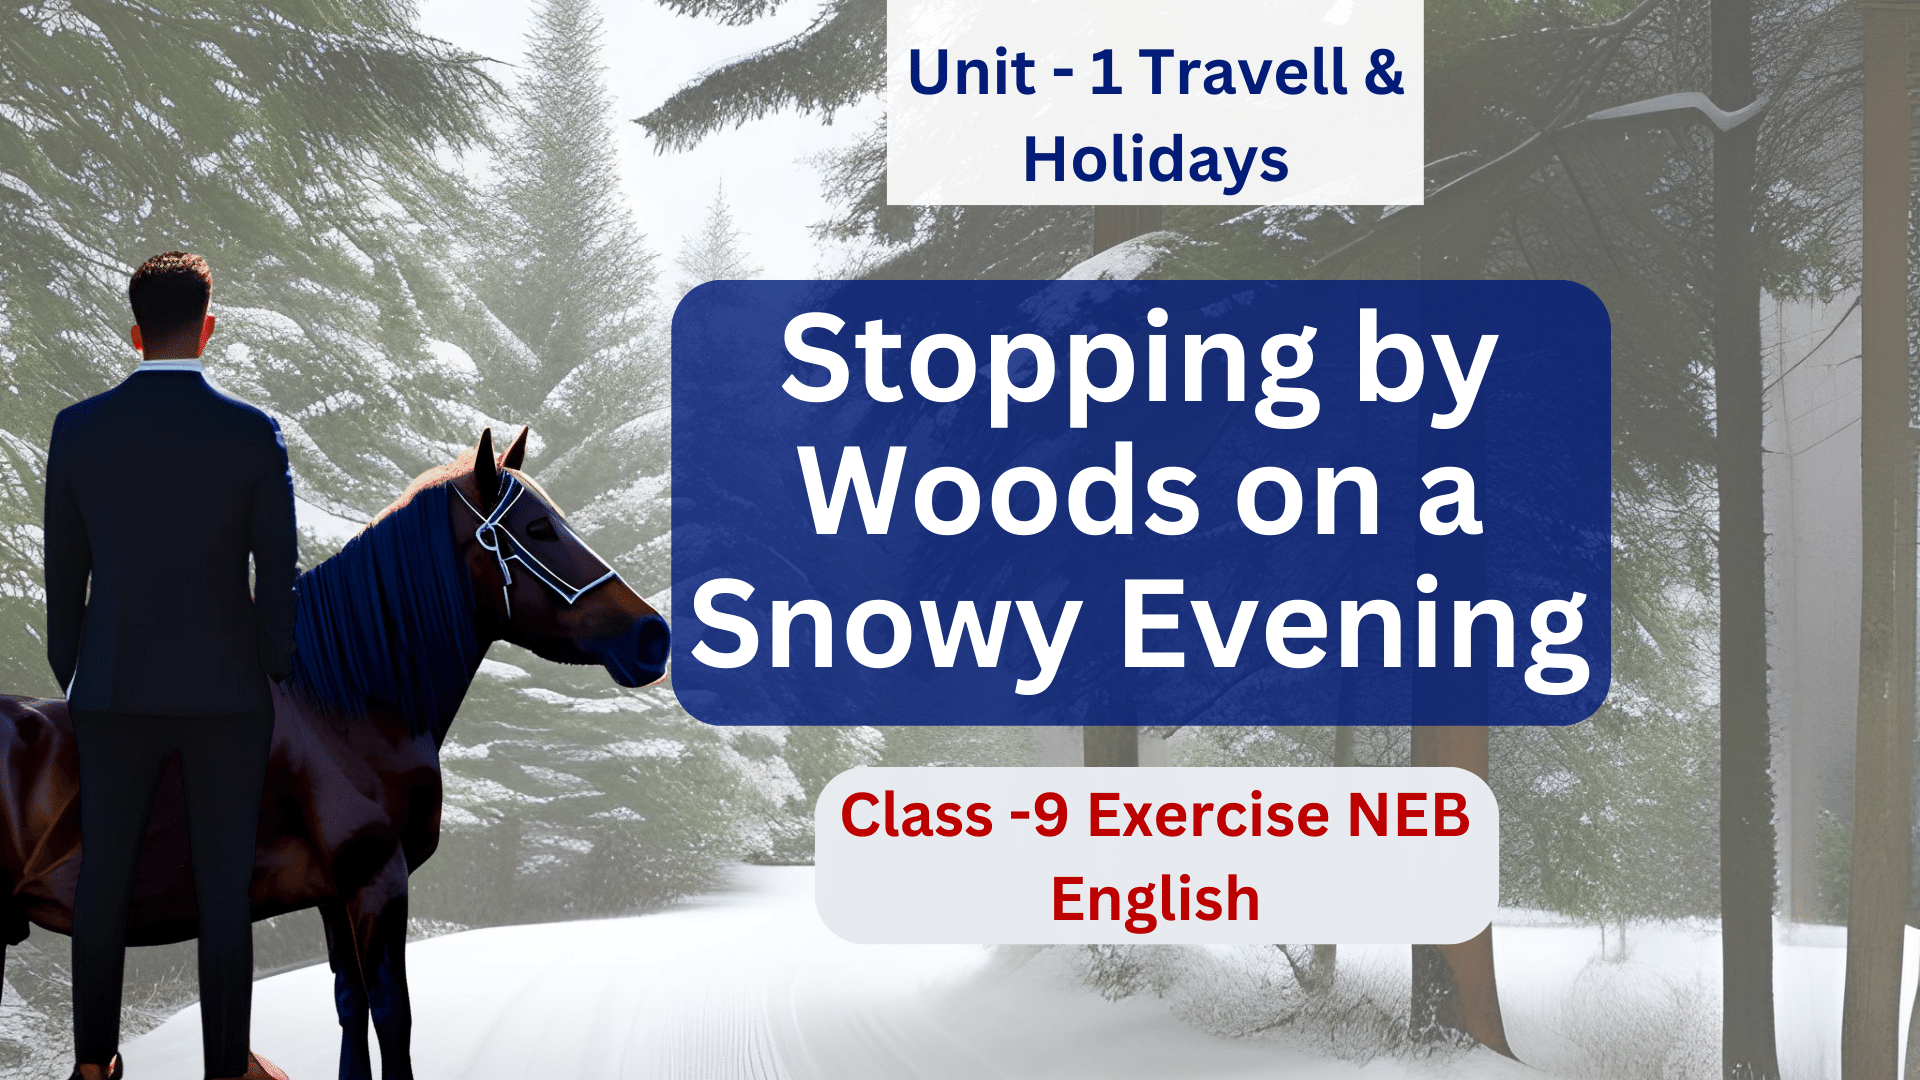 Unit 1 Tavell & Holidays: Stopping by Woods on a Snowy Evening - Class 9 English Exercise